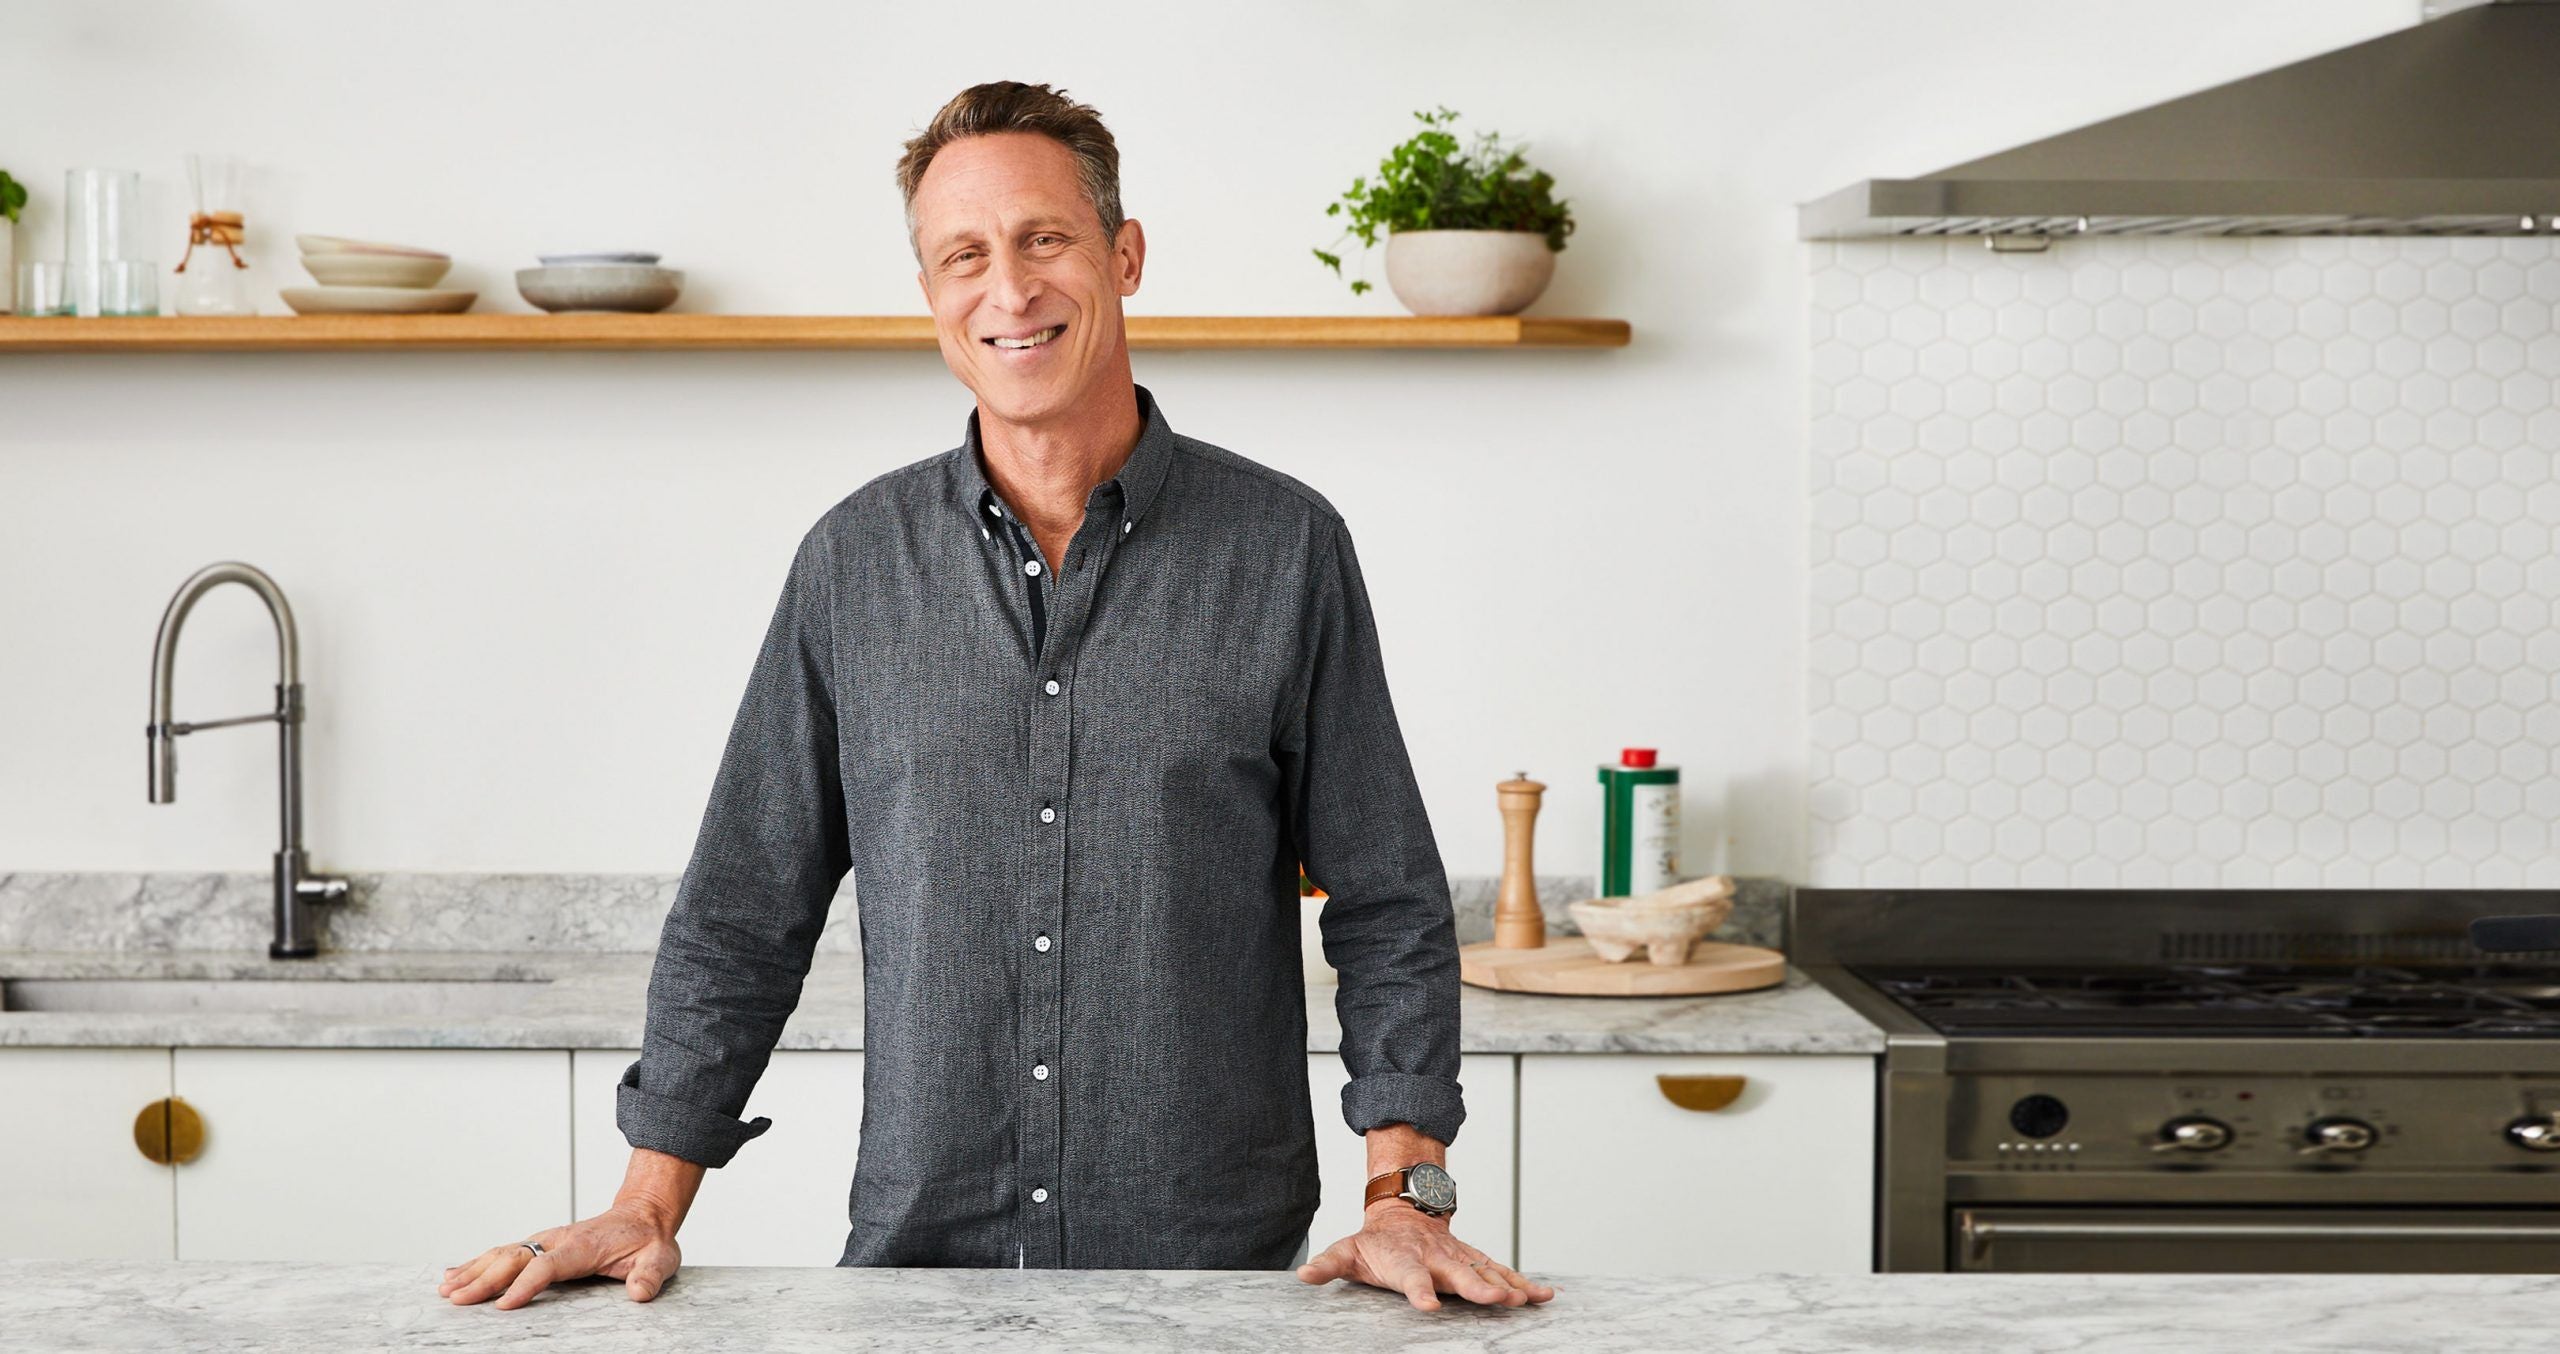 Dr. Mark Hyman on Revolutionizing the Way We Eat & The Pegan Diet